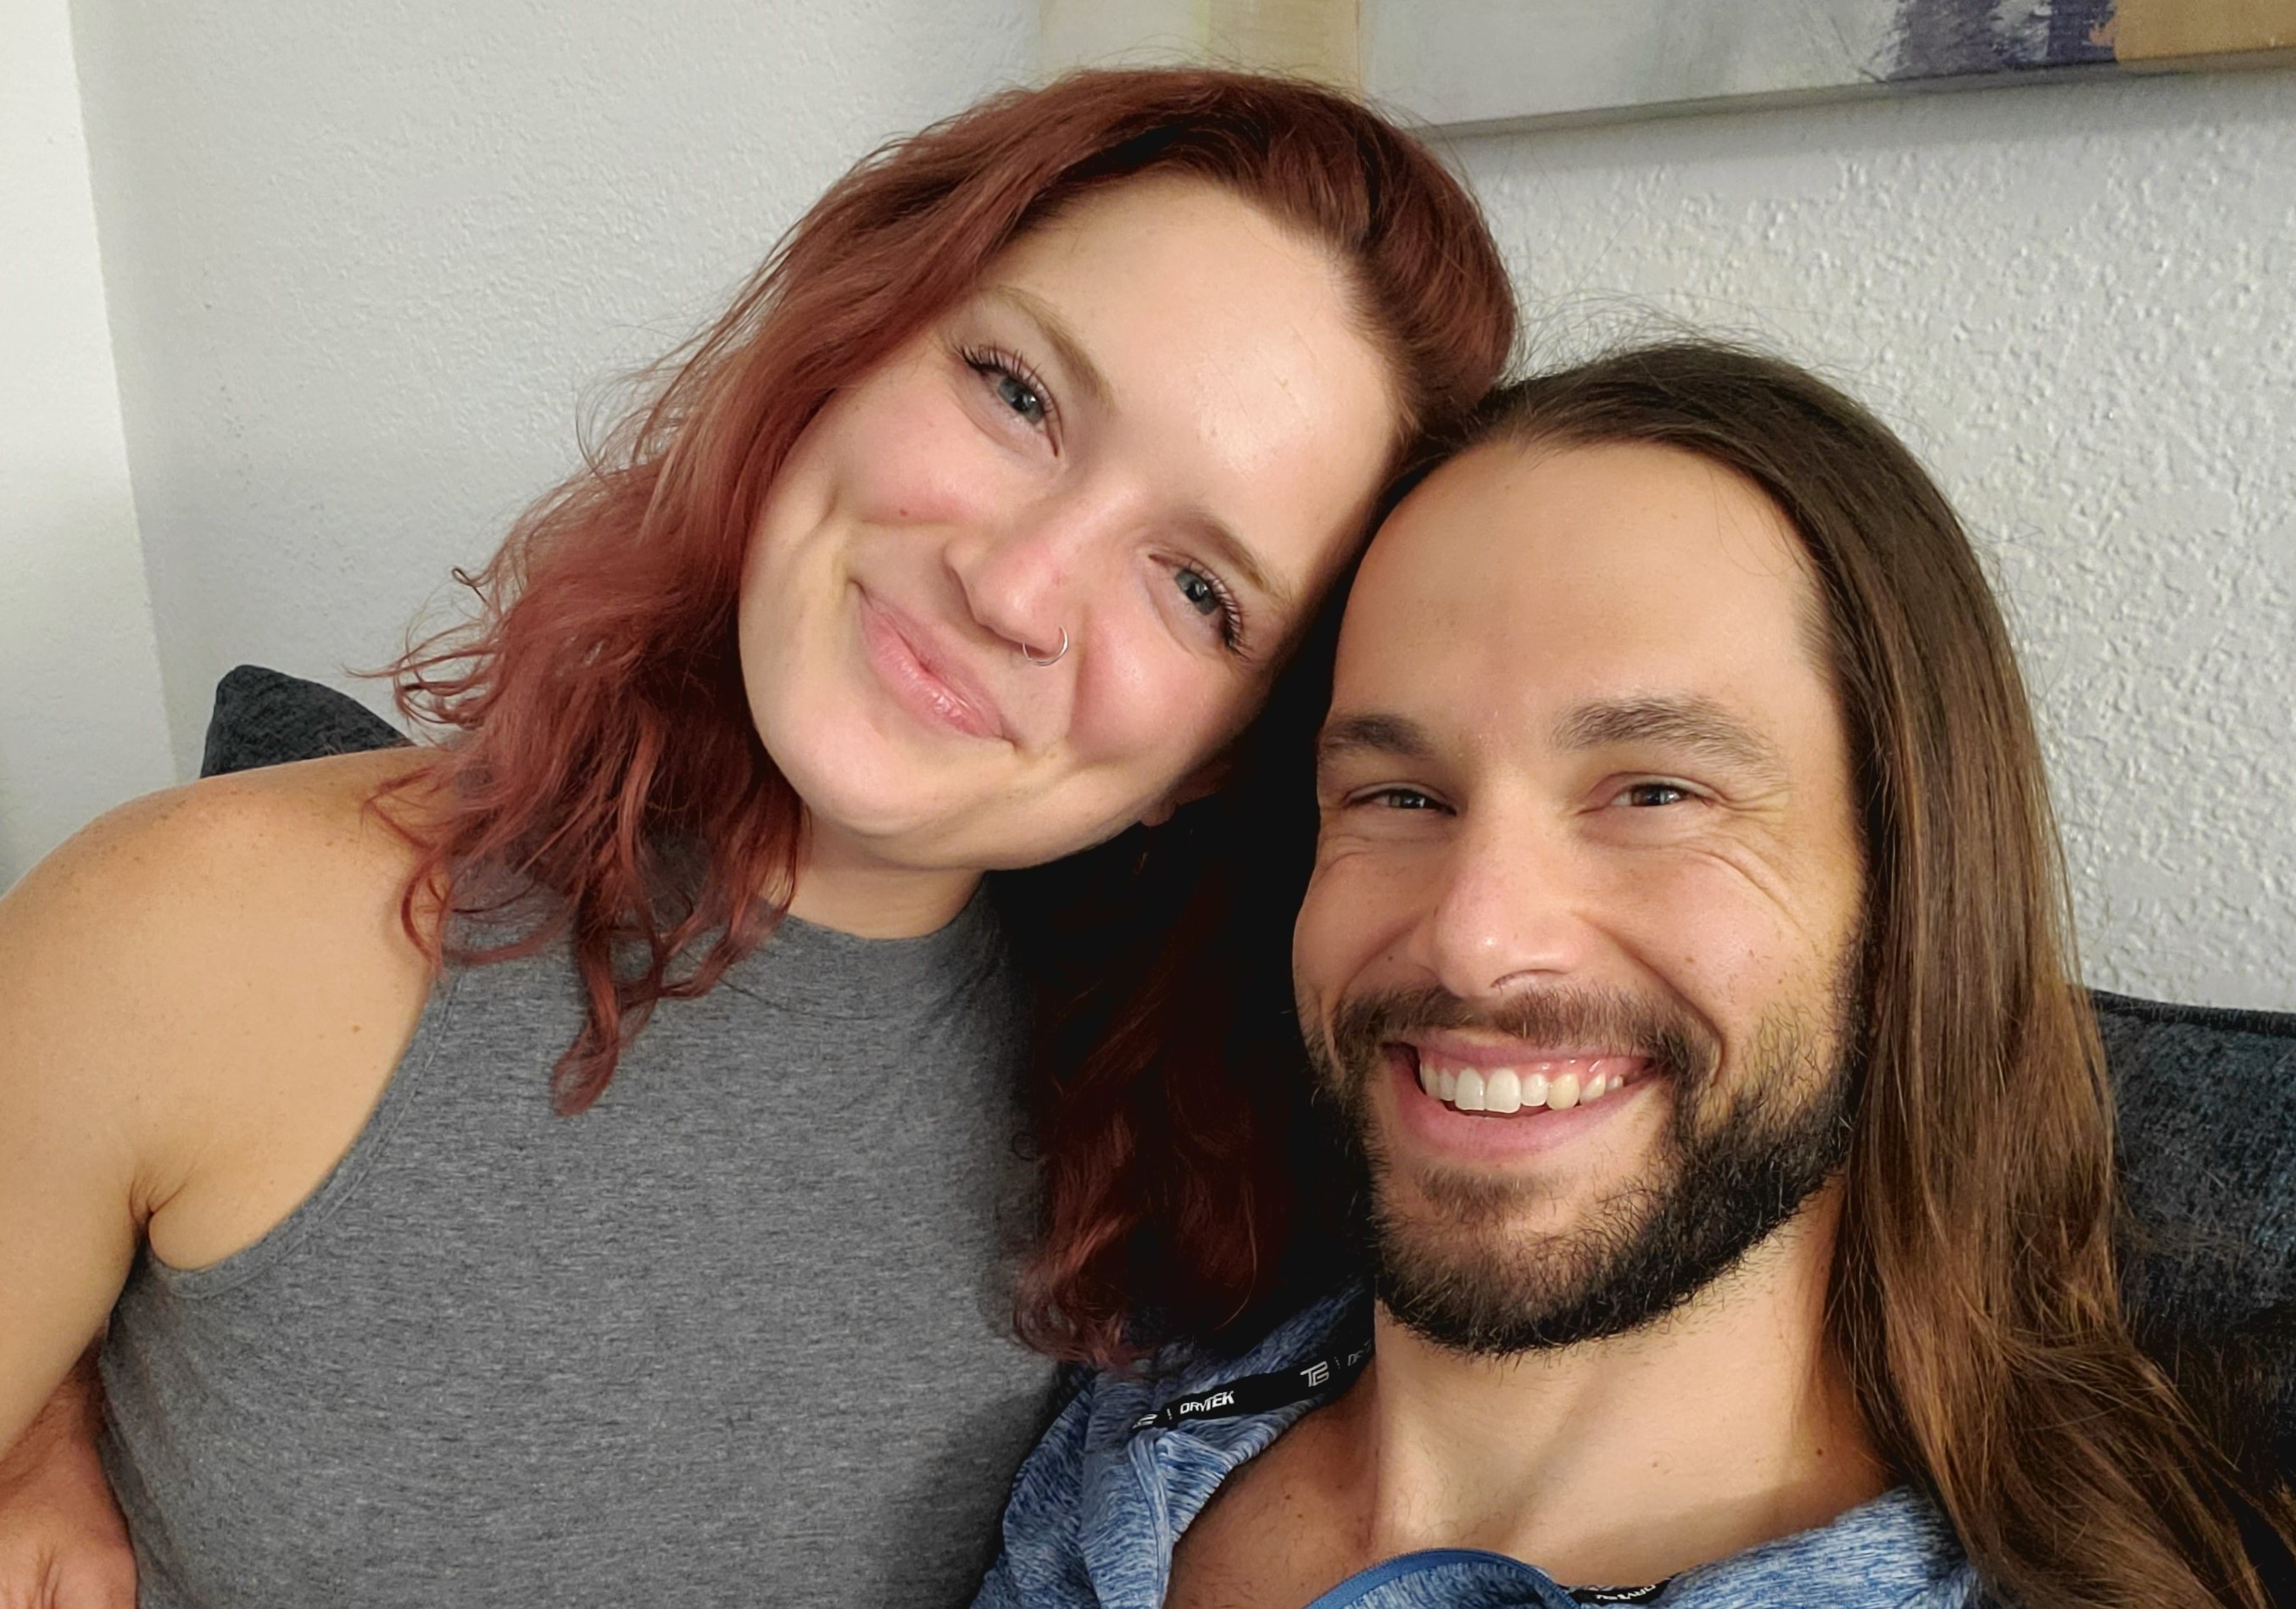 My Fiancé and I Started Camming—People Pay to Watch Us Have Sex